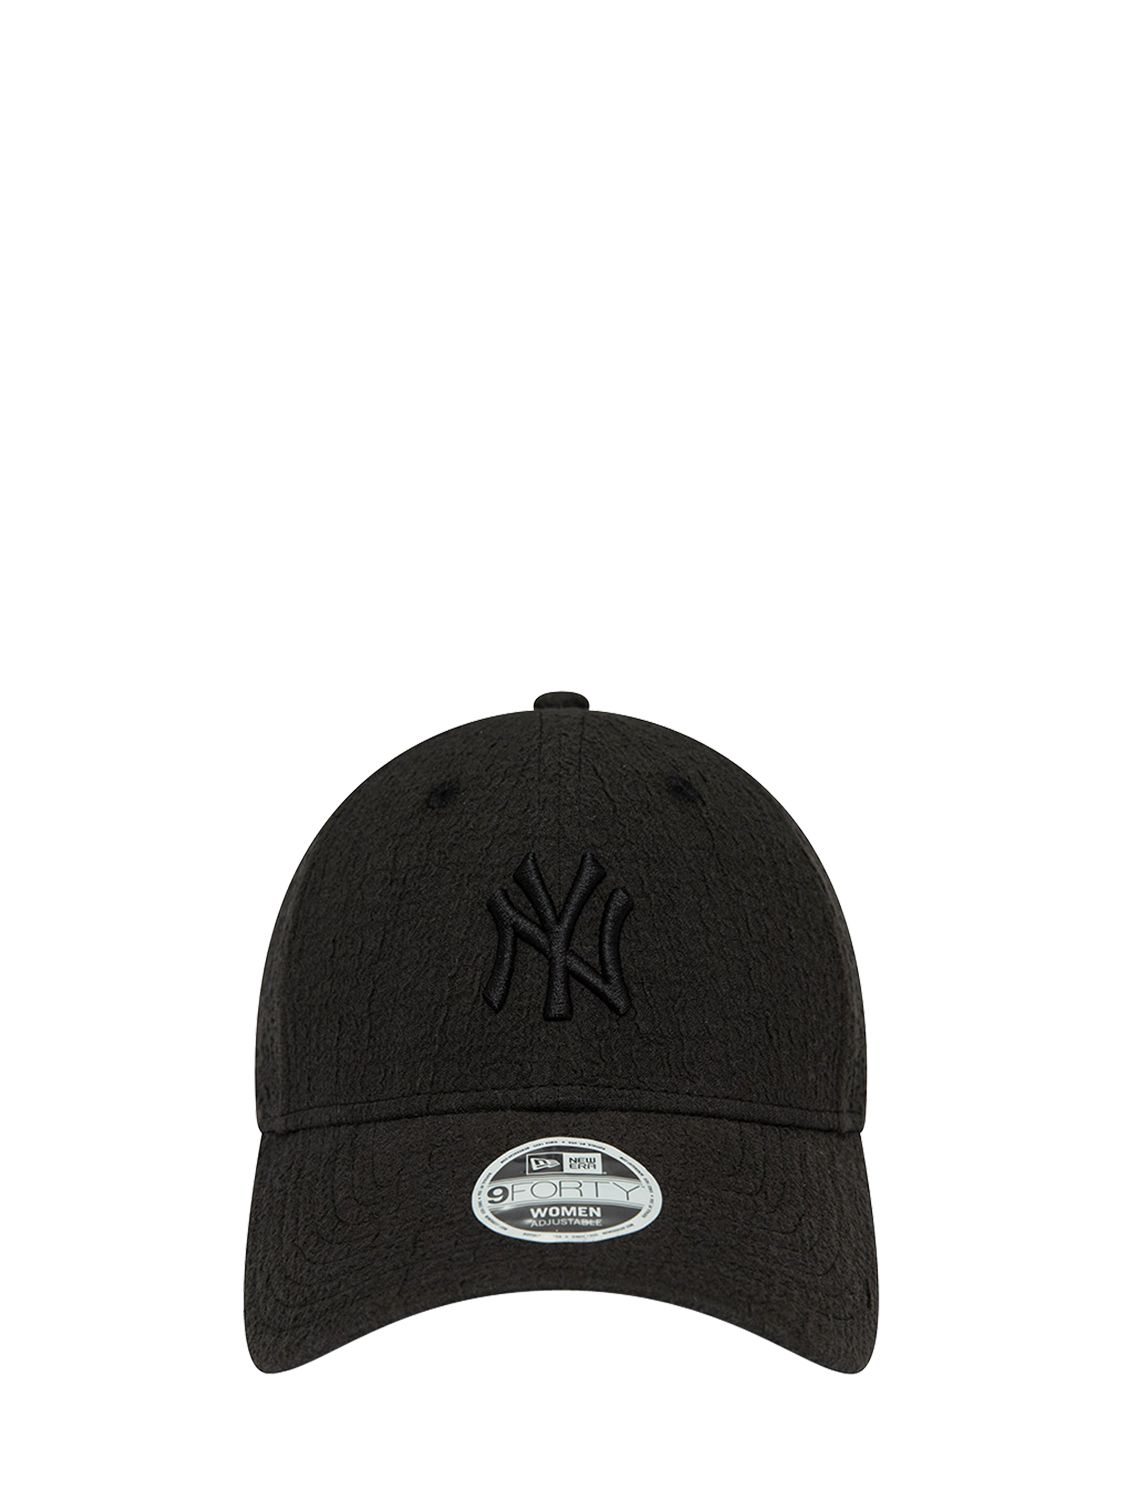 New Era Ny Yankees Bubble Stitch 9forty Hat In Black